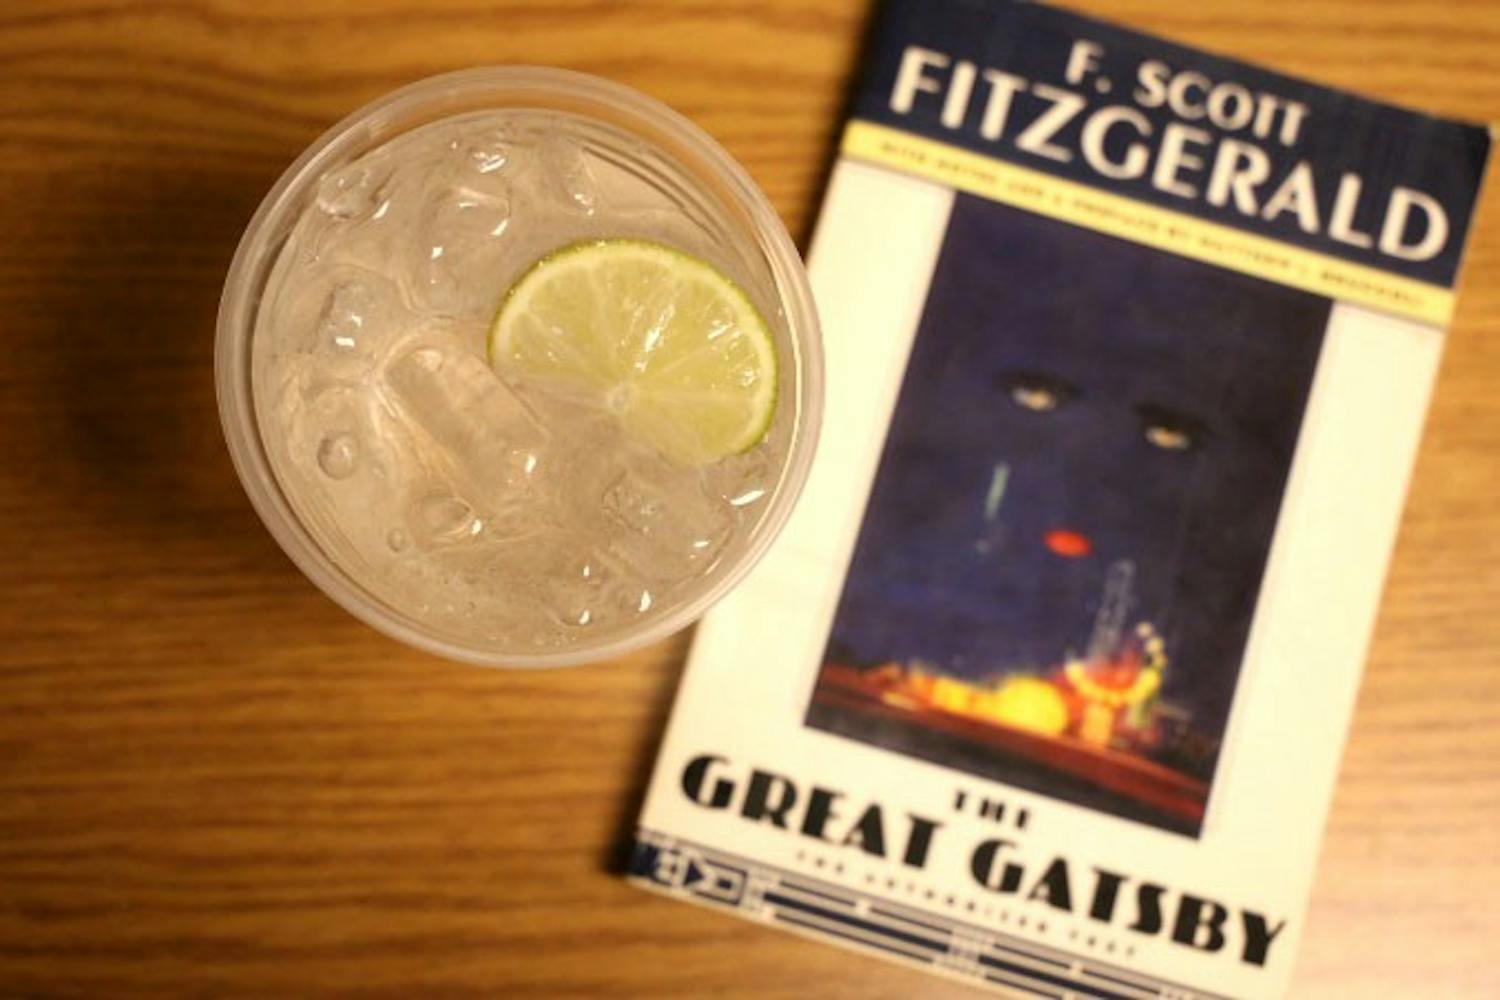 This week, columnist Carson Abernethy pairs The Great Gatsby by F. Scott Fitzgerald with a gin rickey.